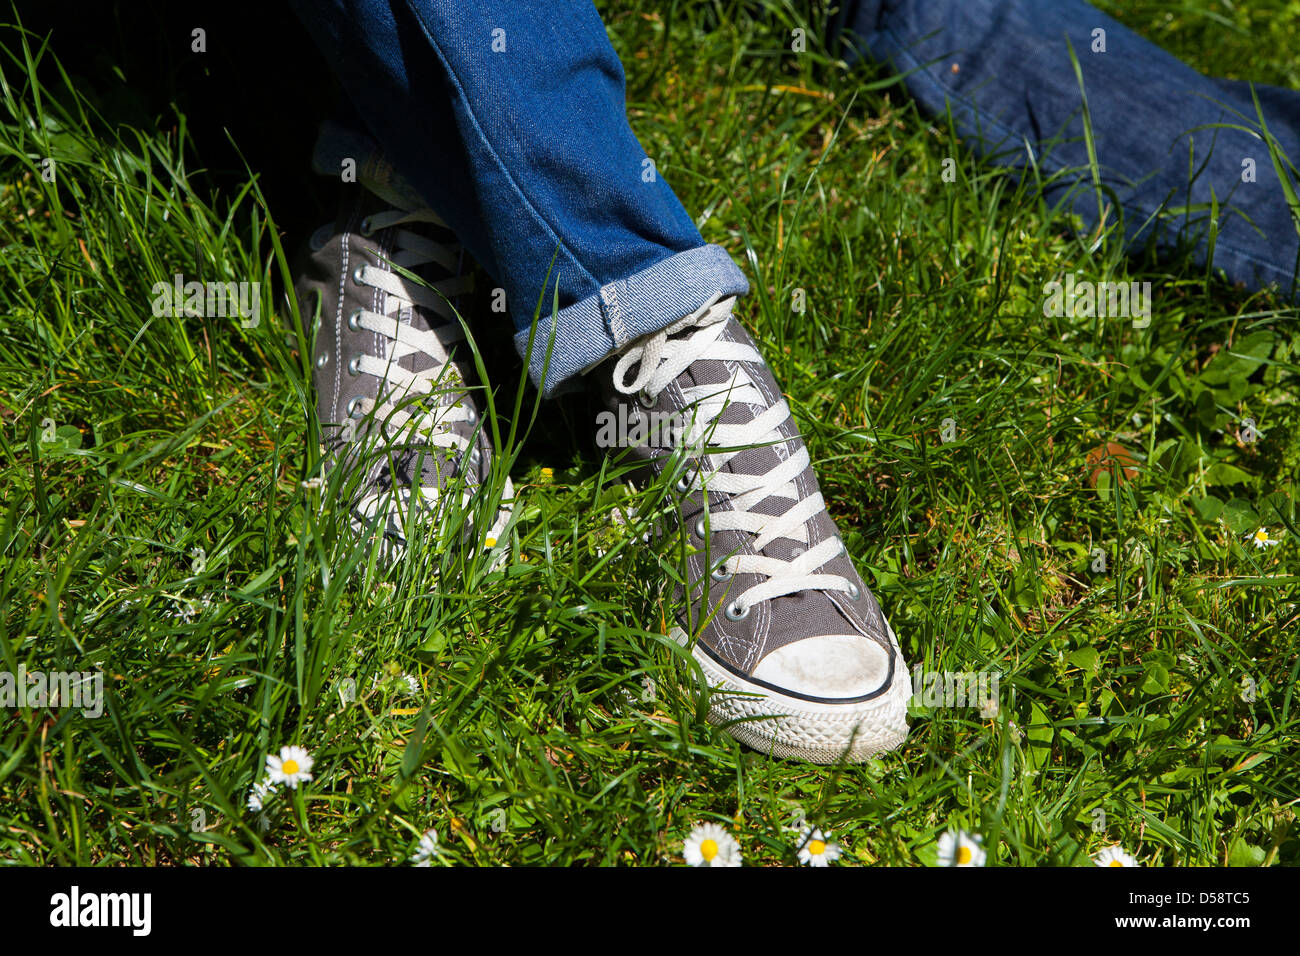 Youth relaxing on a grass field Stock Photo